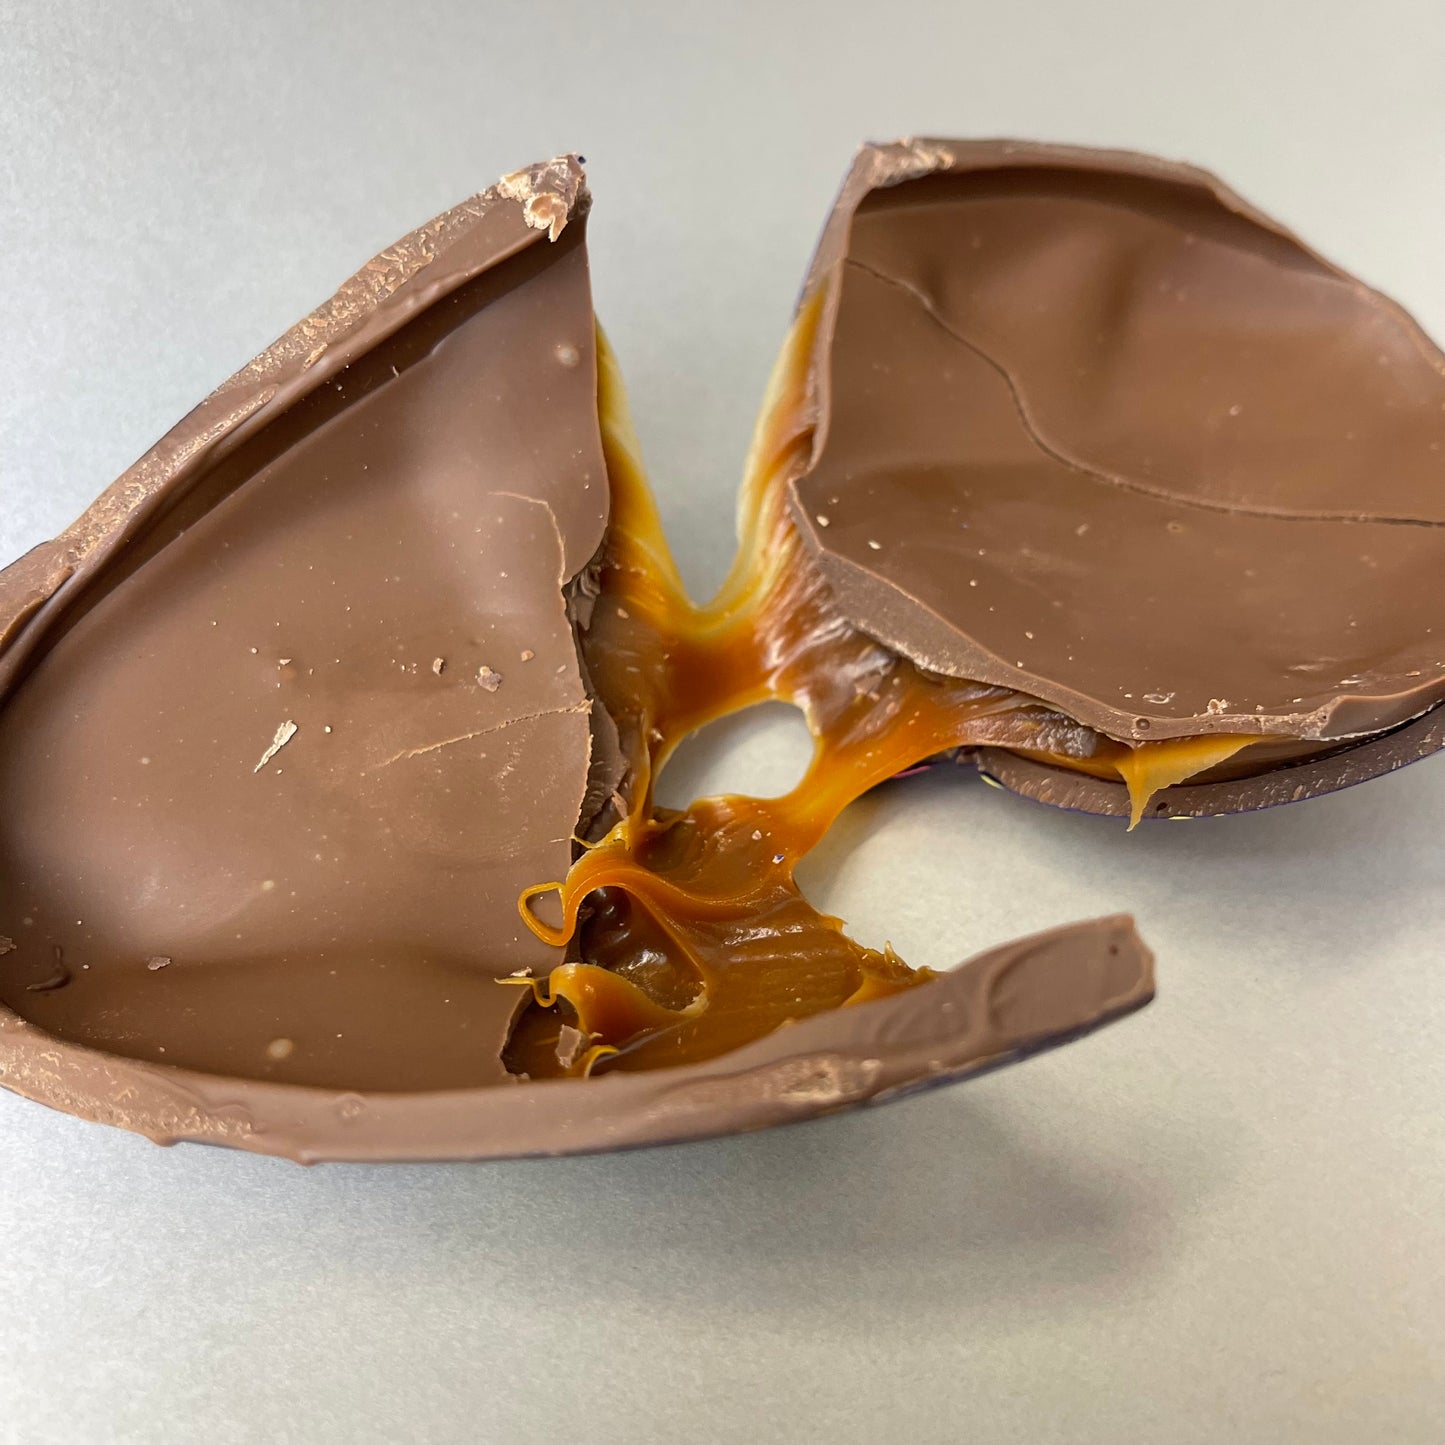 Salted Caramel Milk Chocolate Easter Egg - SOLD OUT